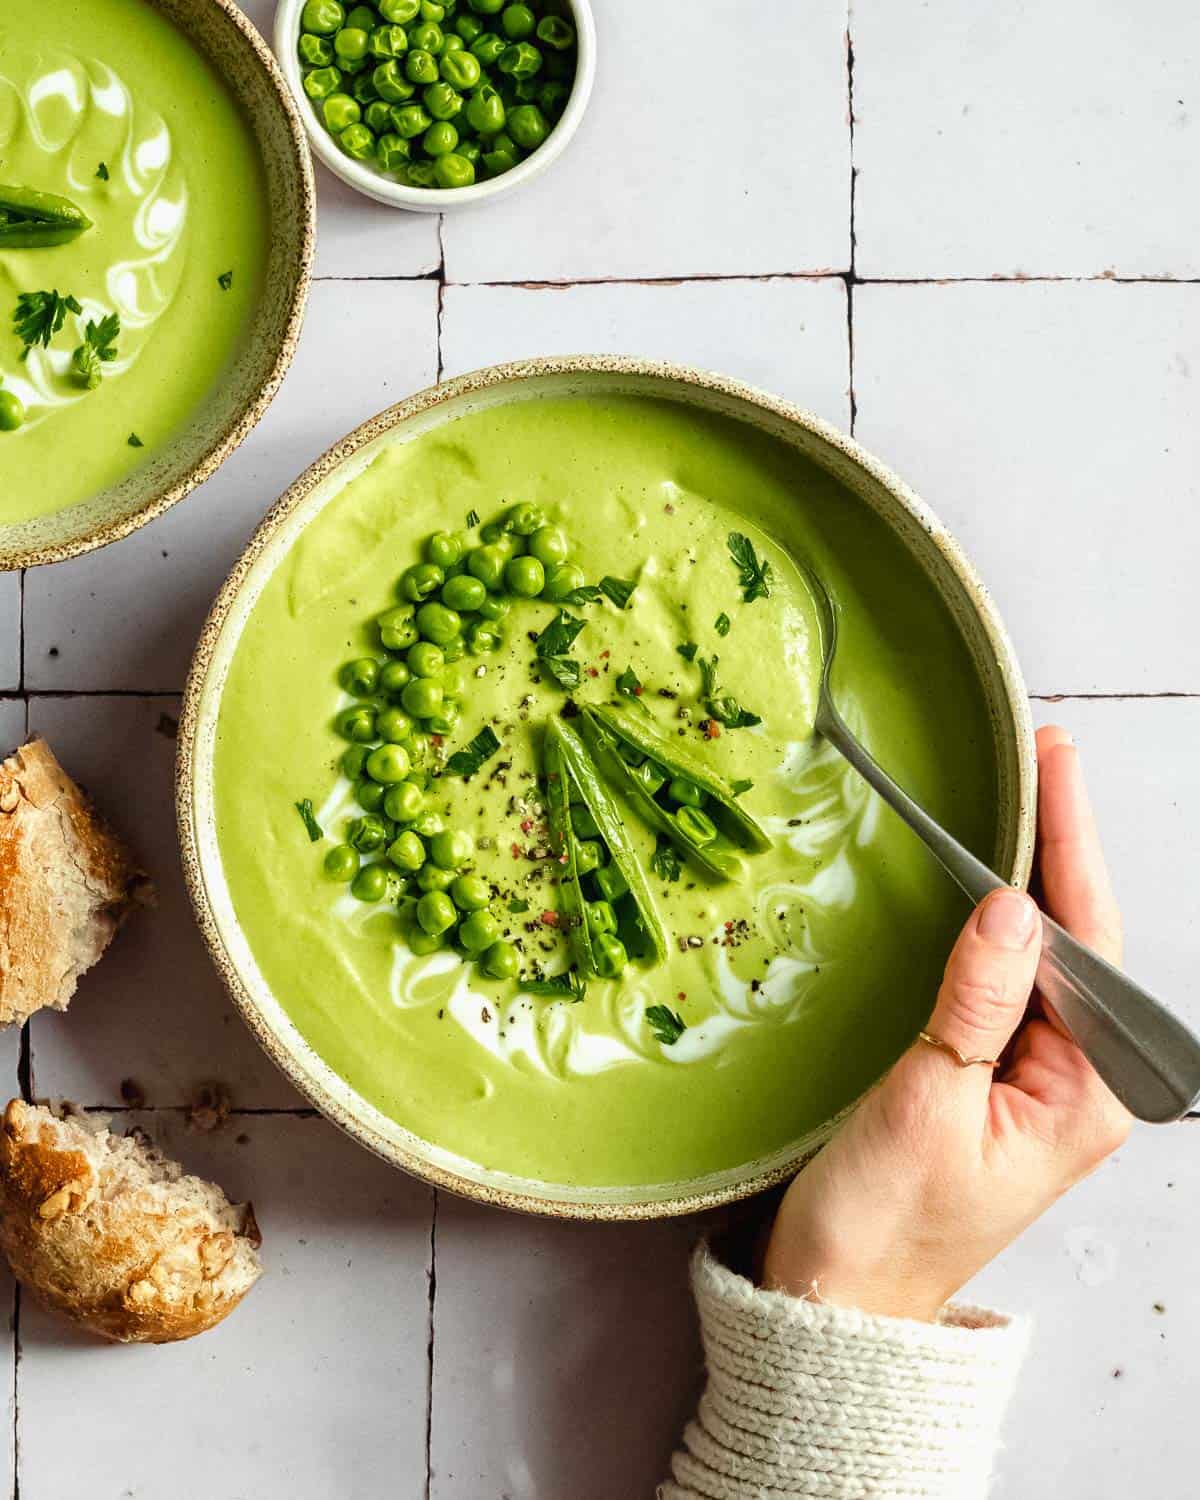  a bowl of broccoli pea soup with a hand holding the soup.